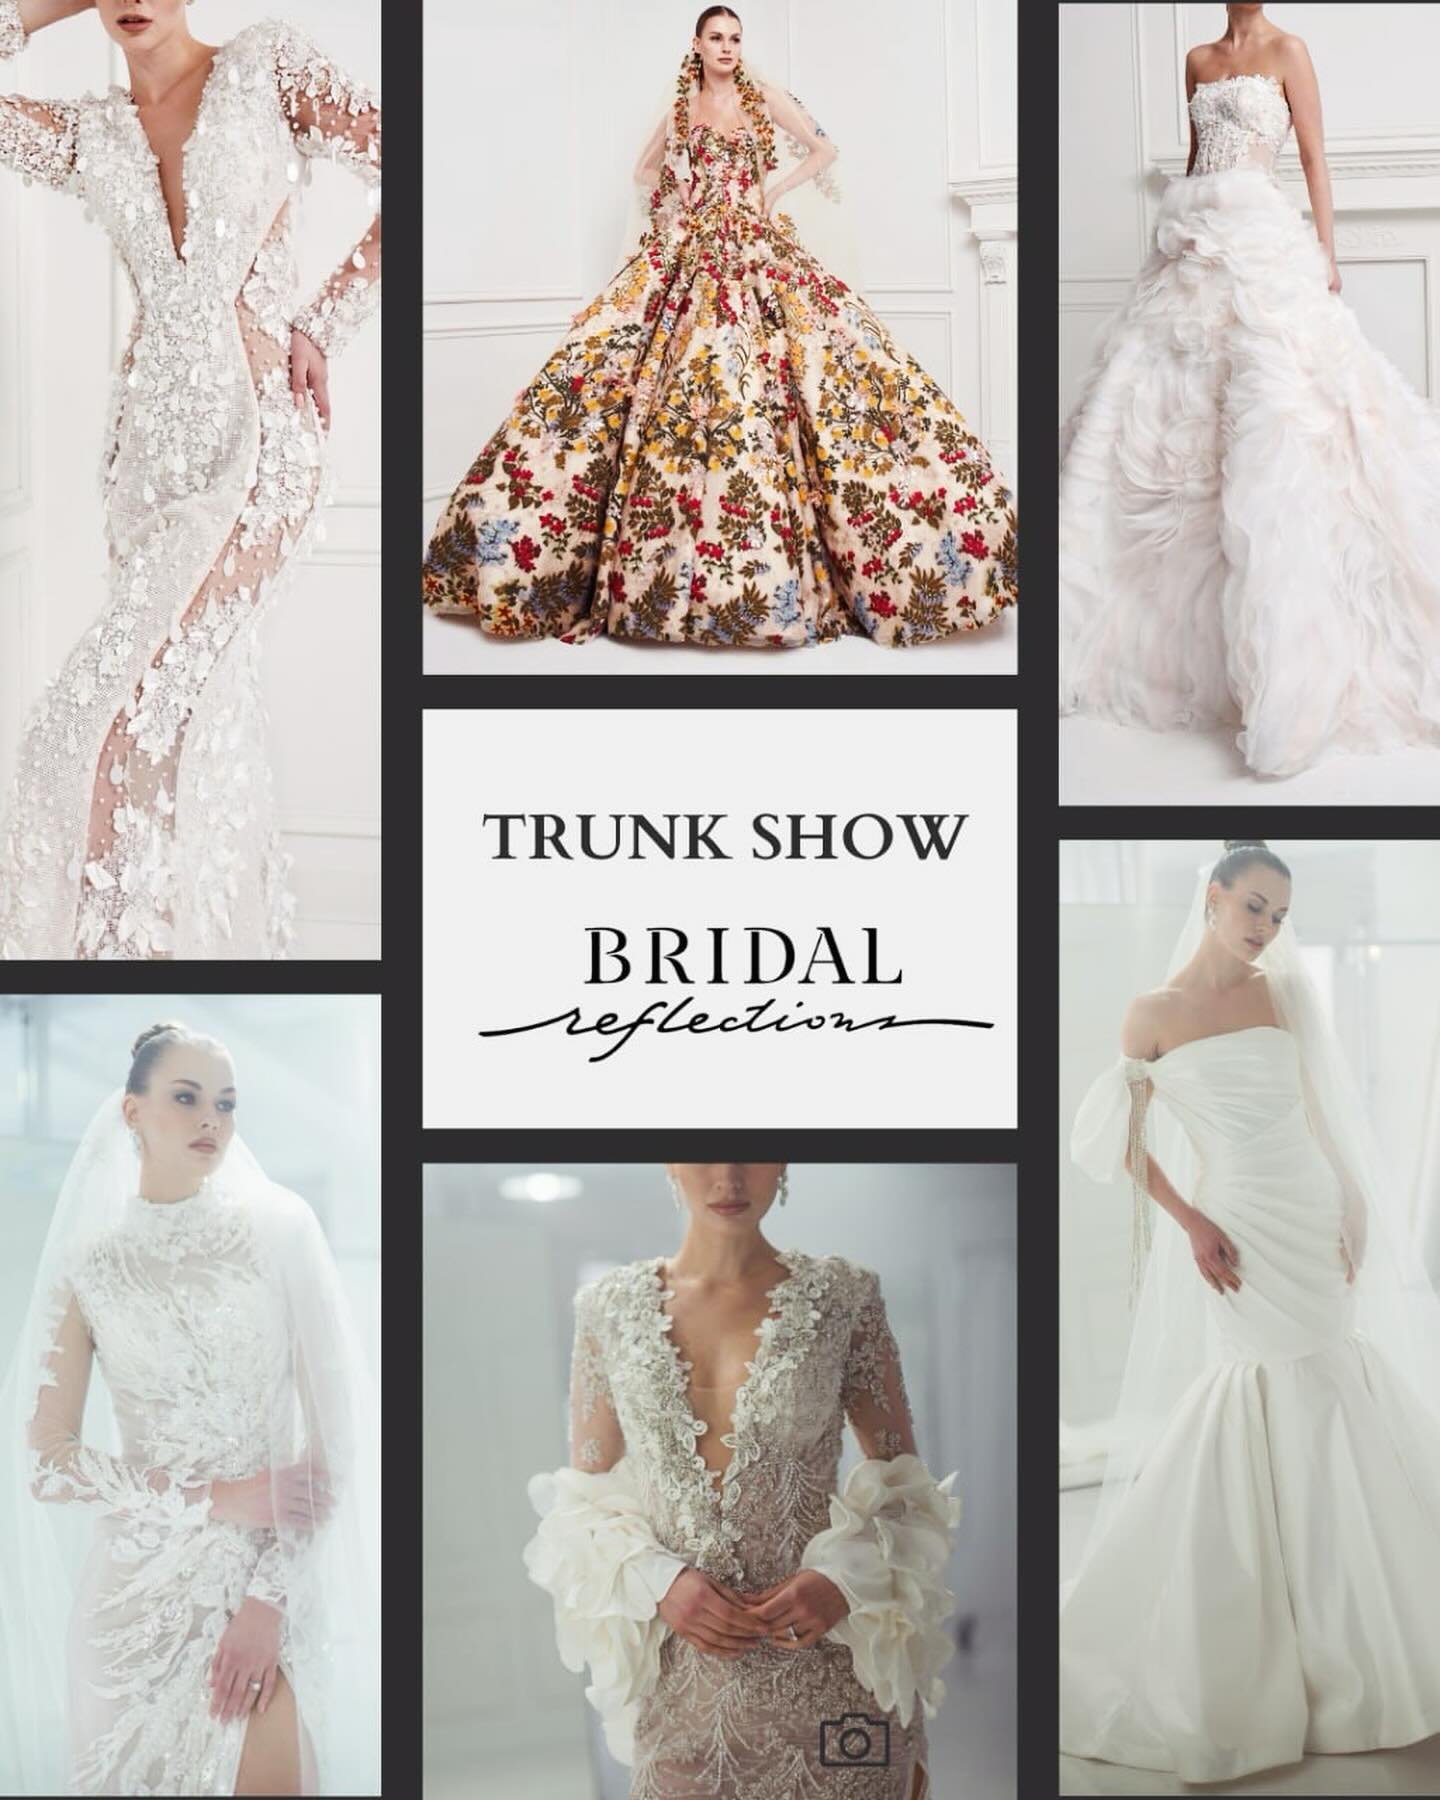 Discover timeless romance and unparalleled beauty at our wedding dress trunk show, where fairy tales come to life. Featuring the bestsellers and latest additions to our bridal collection! Join us at @bridalreflectionsny for an unforgettable experienc